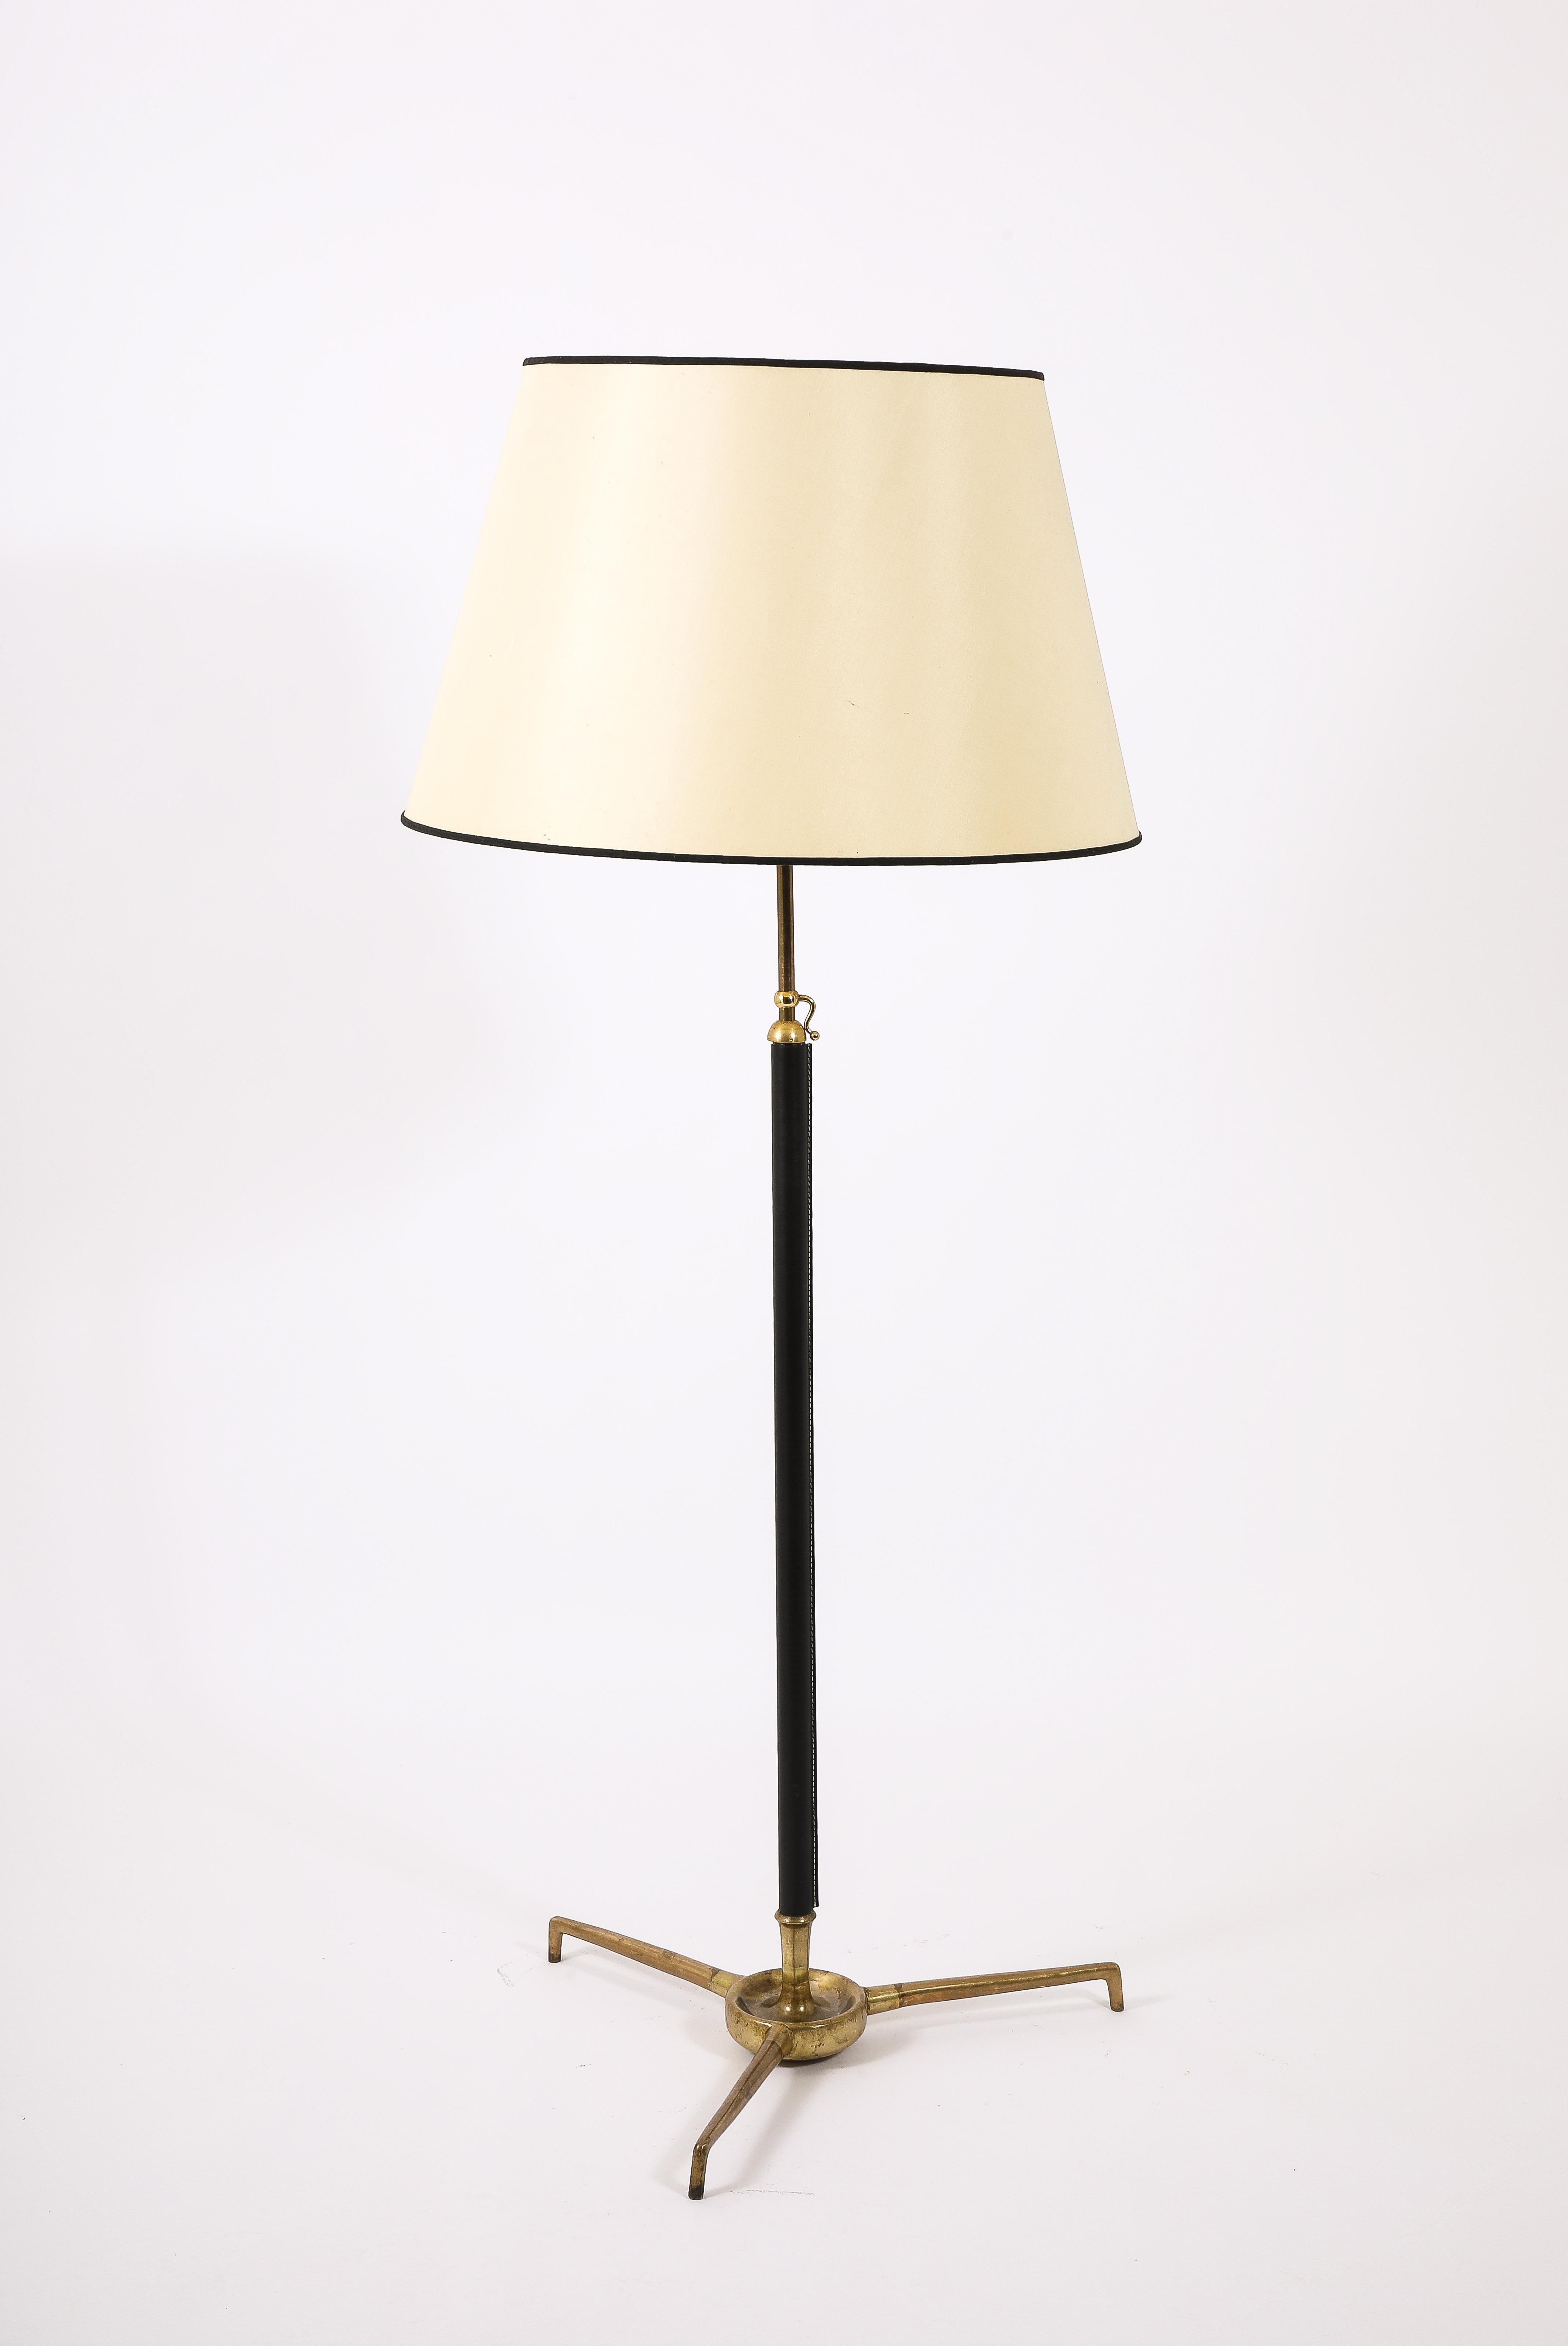 French Large Bronze & Leather Floor Lamp by Arlus, France 1950's For Sale